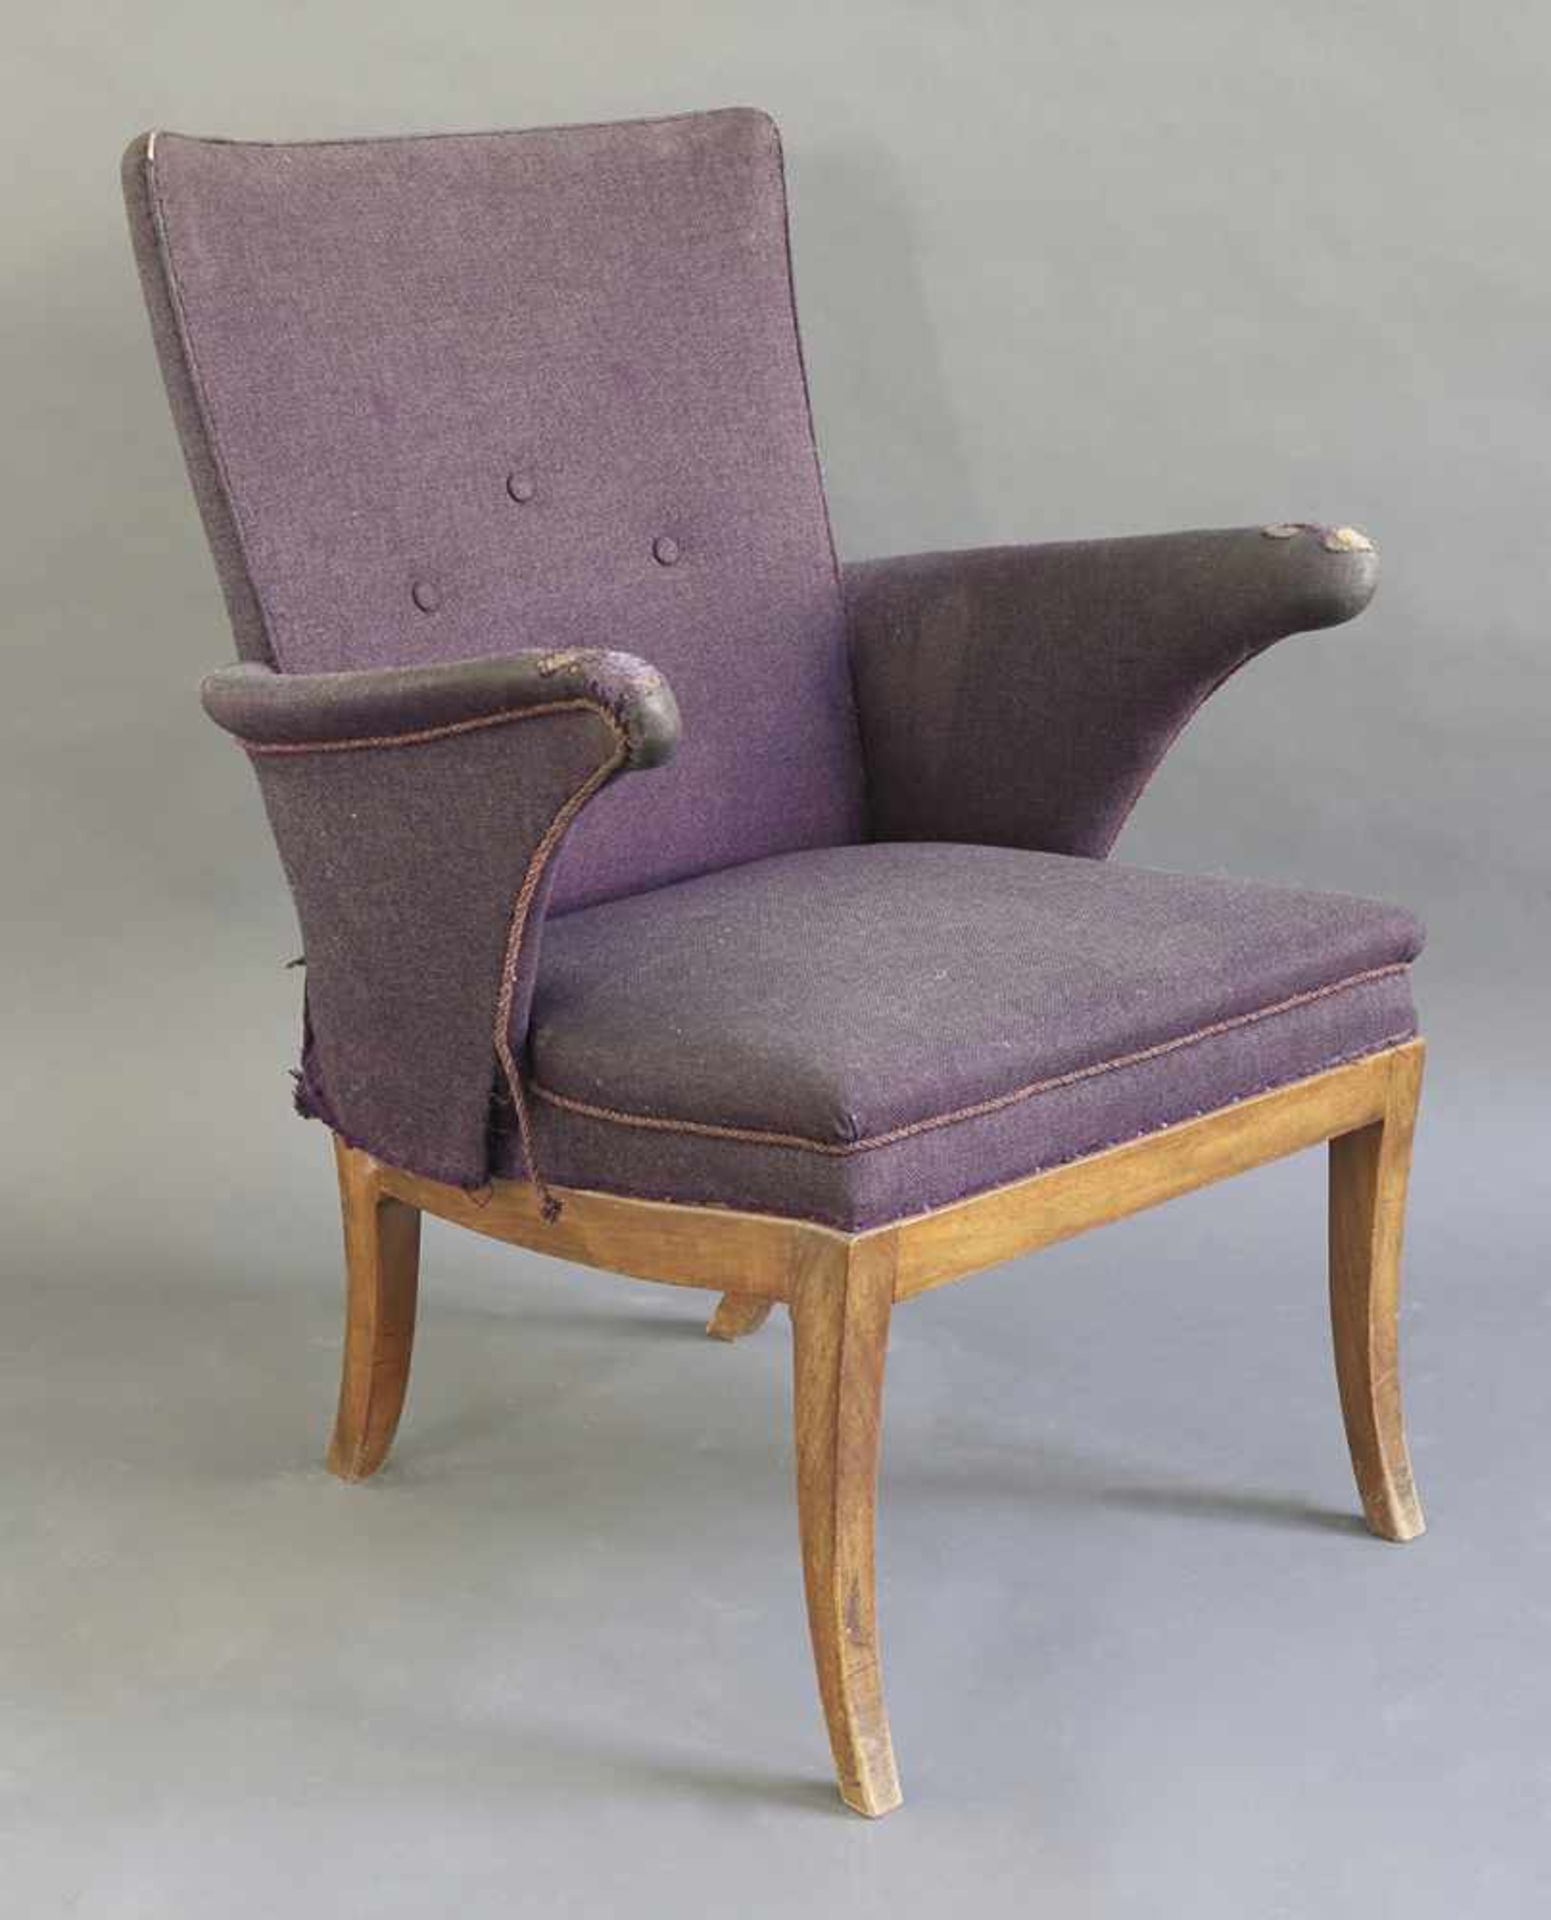 Frits HenningsenFrits HenningsenFrits Henningsen Easy ChairArmchair. Designed 1932. Wood, upholstery